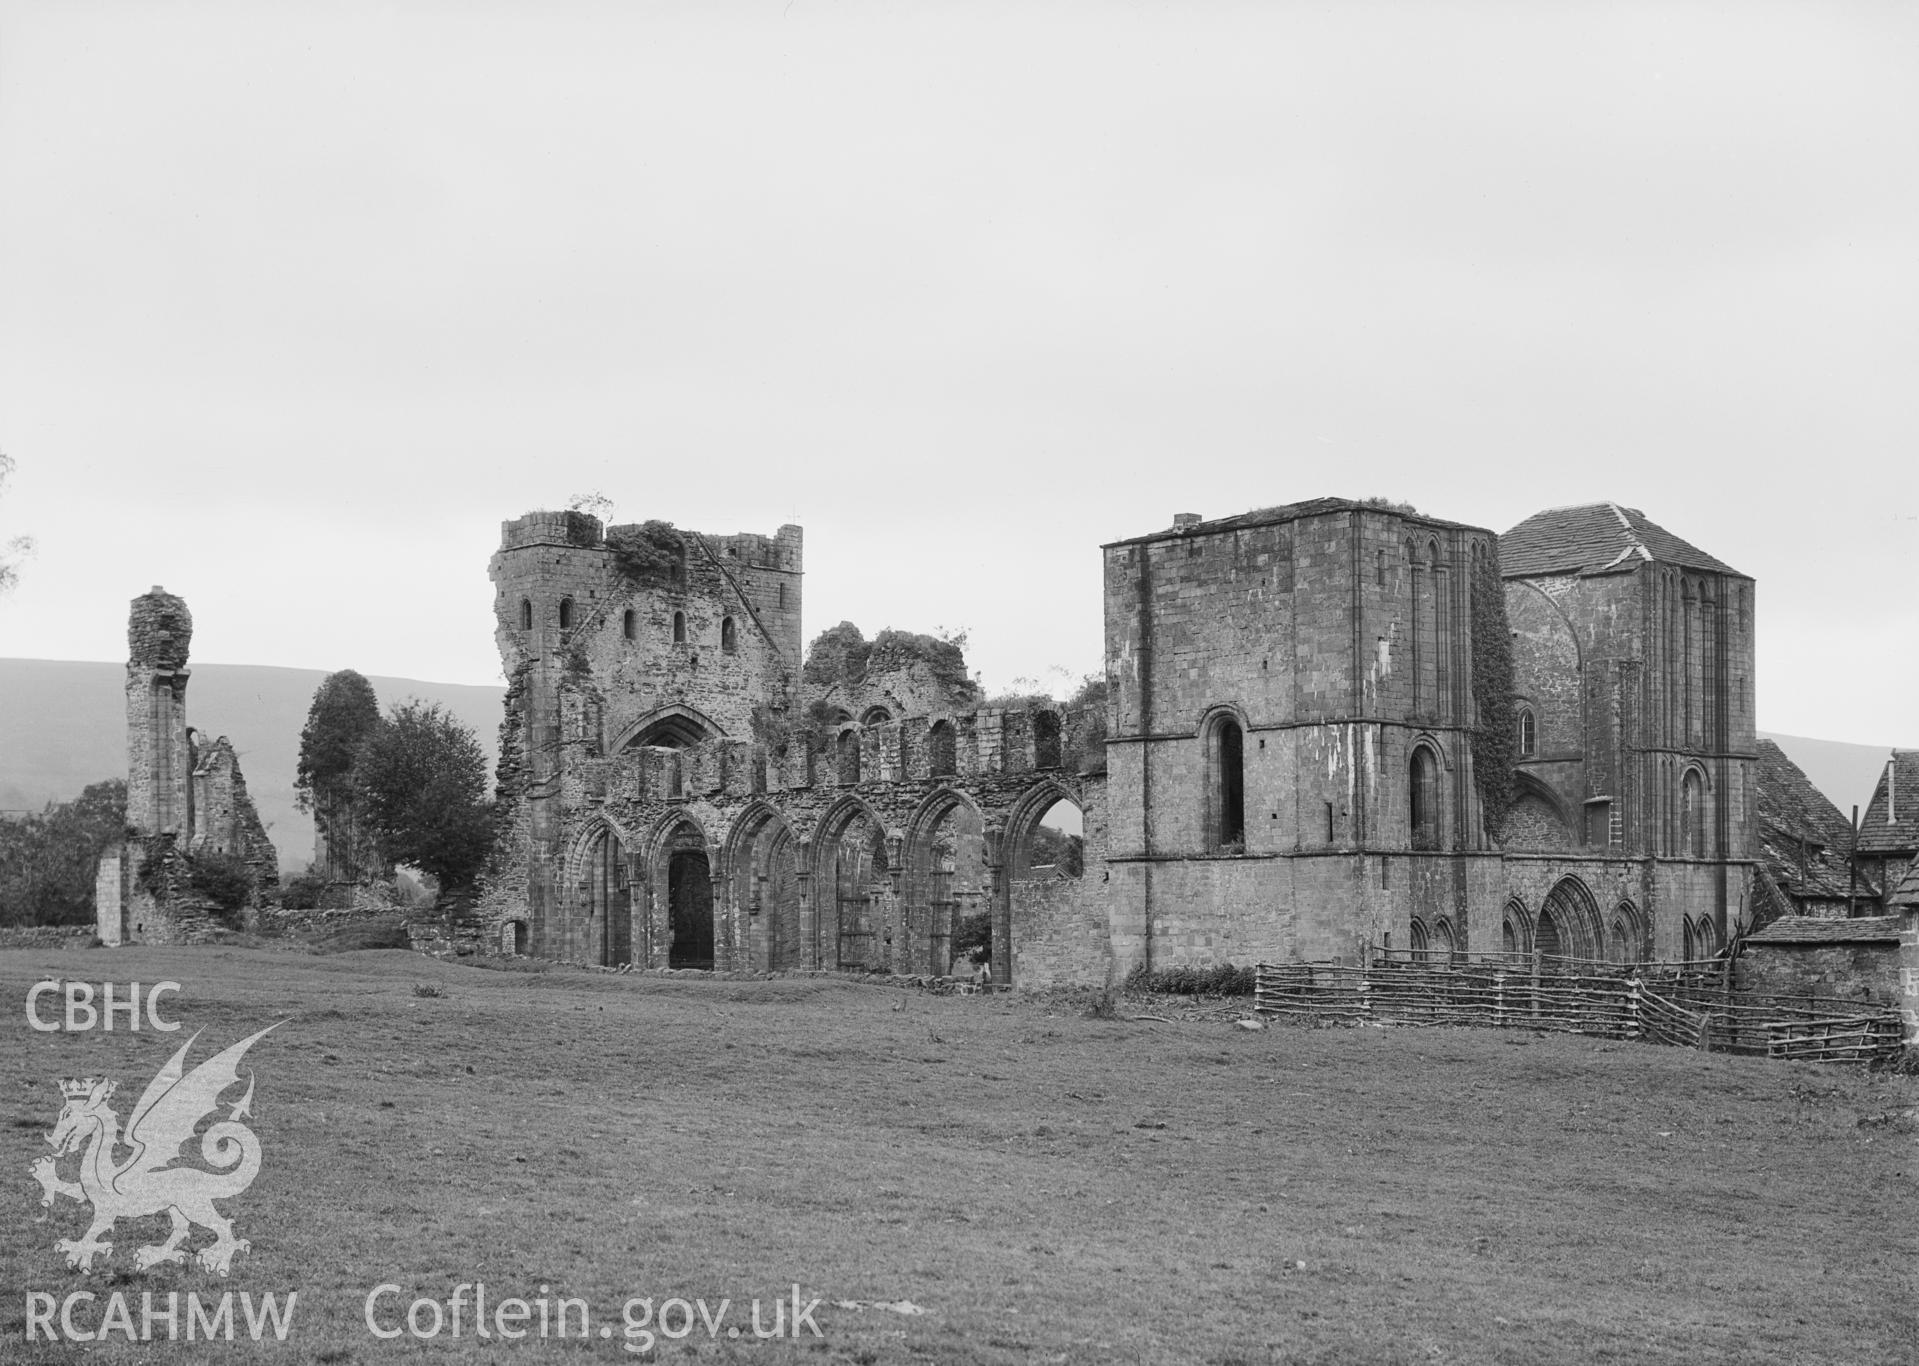 Exterior view of Llanthony Abbey from the northwest, taken by Clayton.